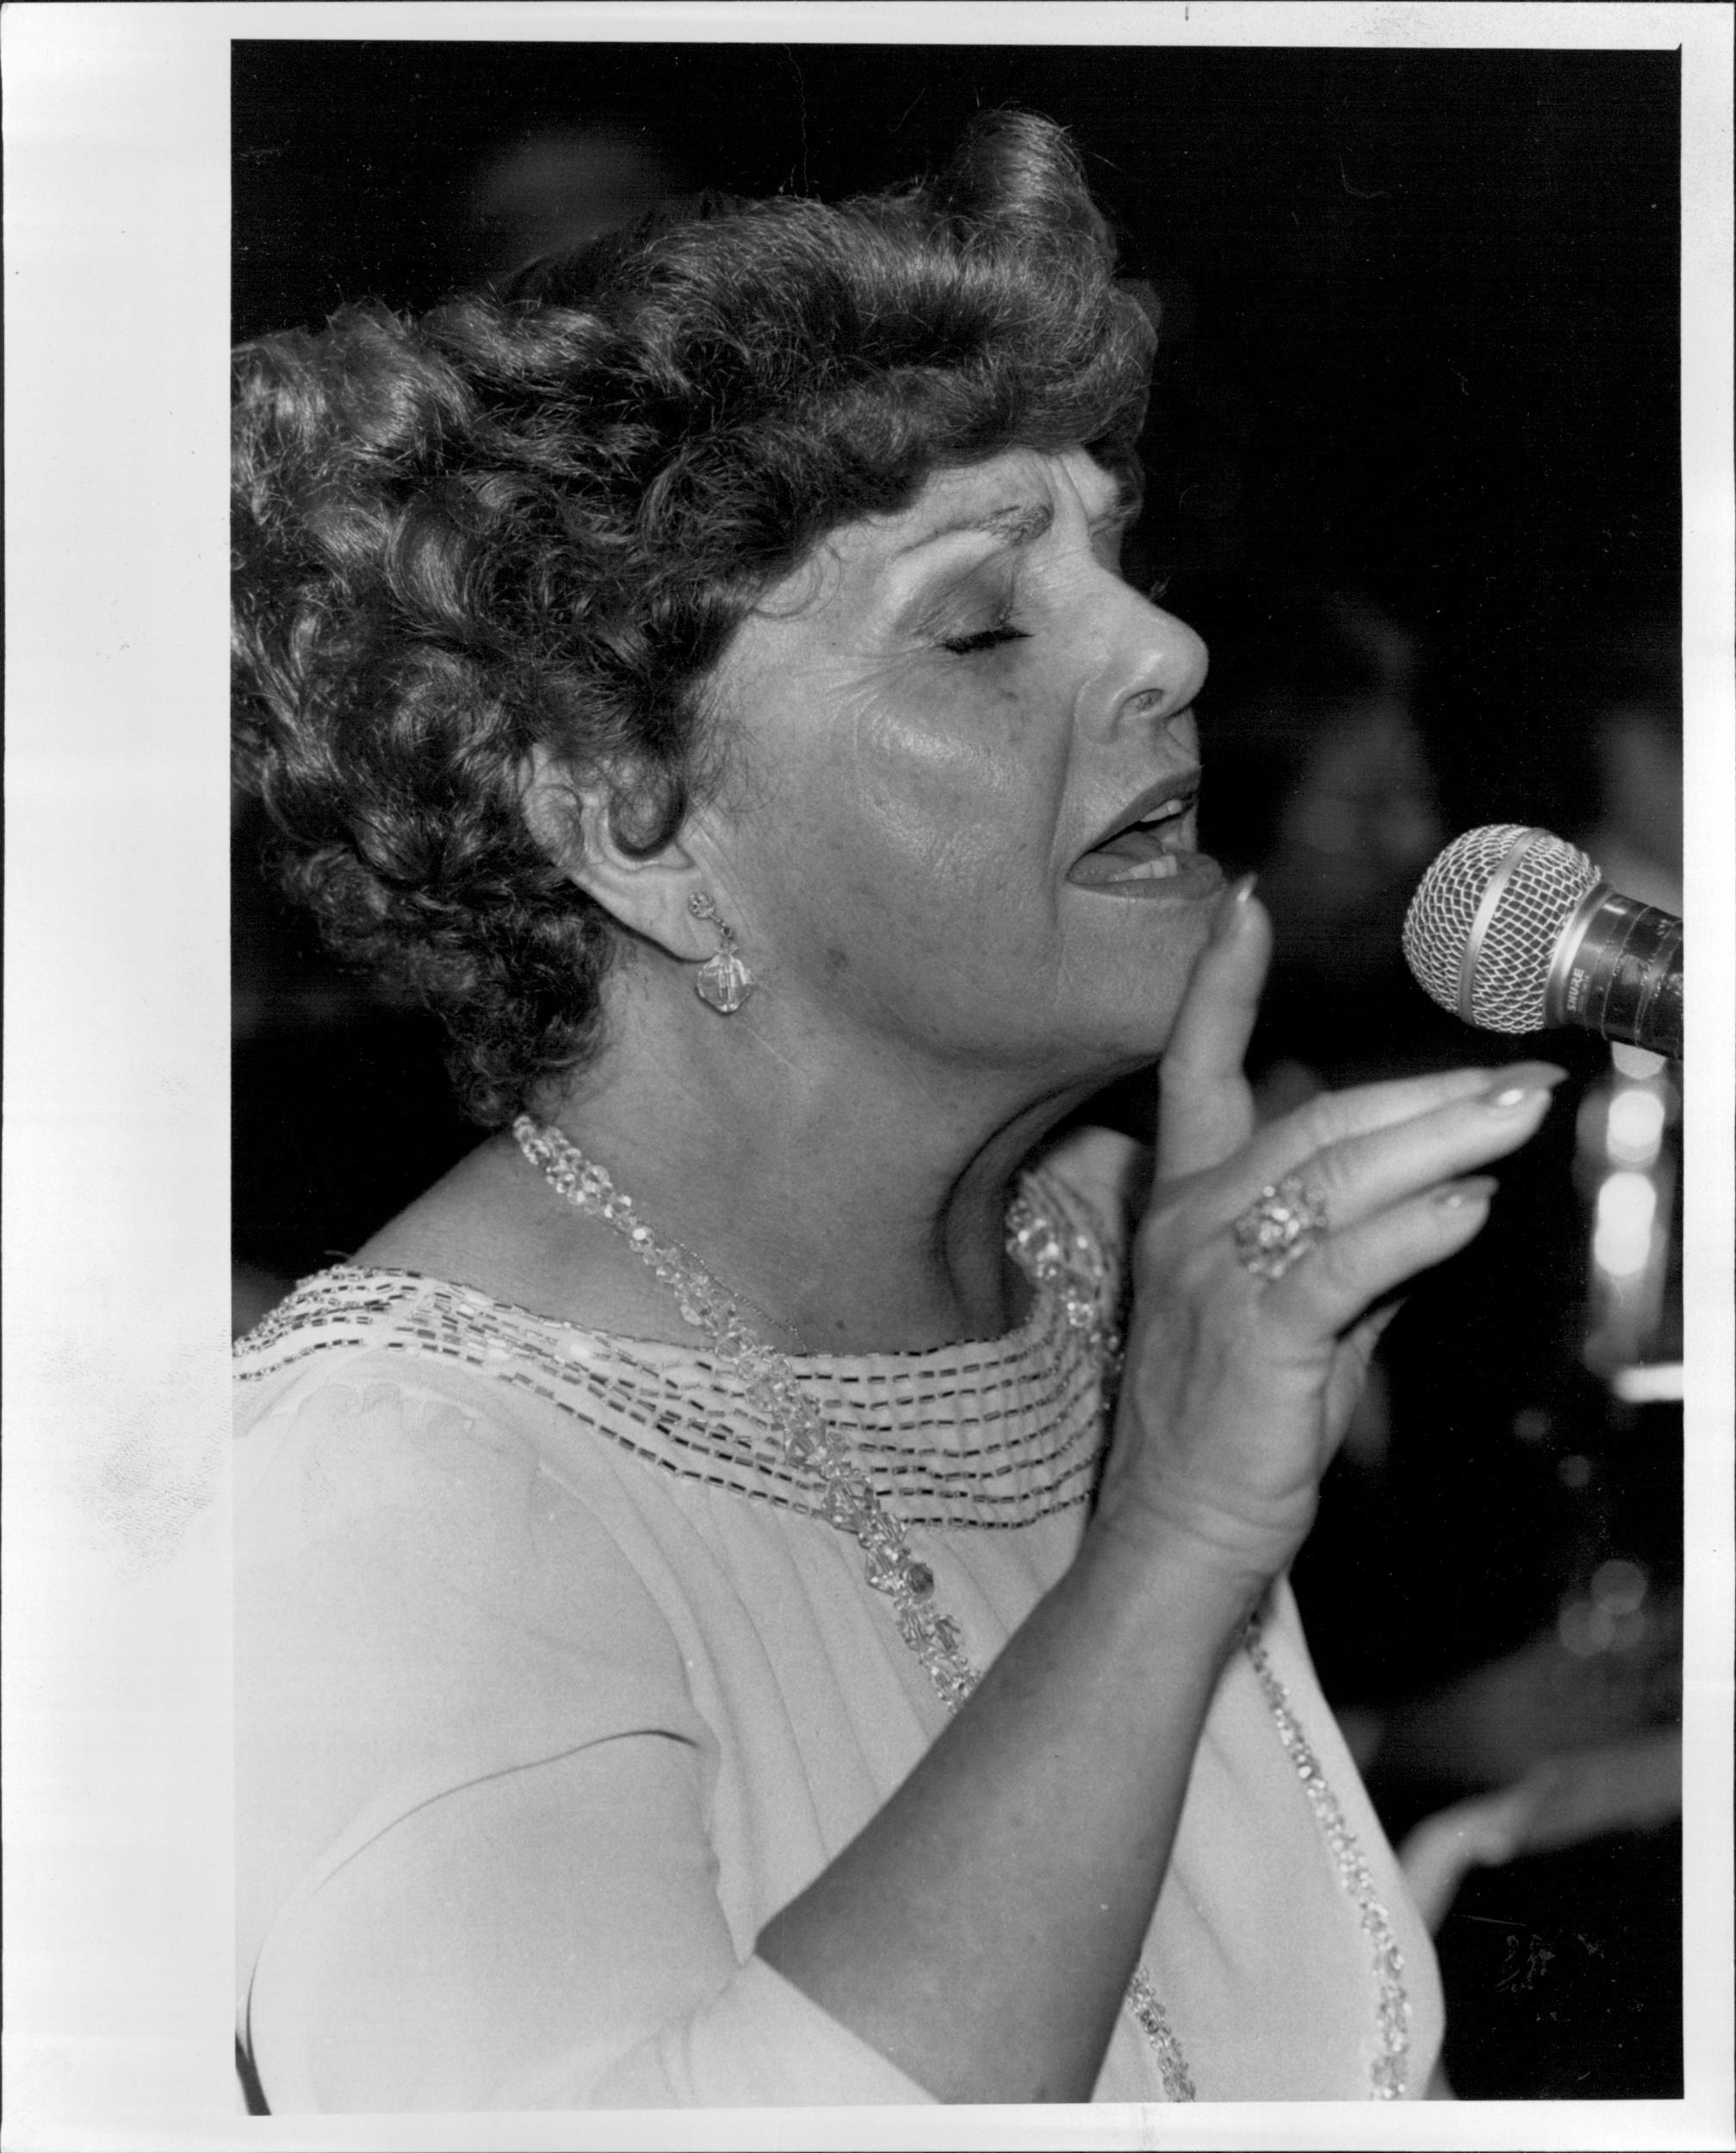 <p>Tobin was an in-demand singer in the ‘30s and ‘40s. Her peak probably came when she was singing with Benny Goodman’s band. That’s when she did her version of “There’ll Be Some Changes Made,” which proved hugely popular. It was the No. 2 song on the radio show “Your Hit Parade” for 15 weeks.</p>